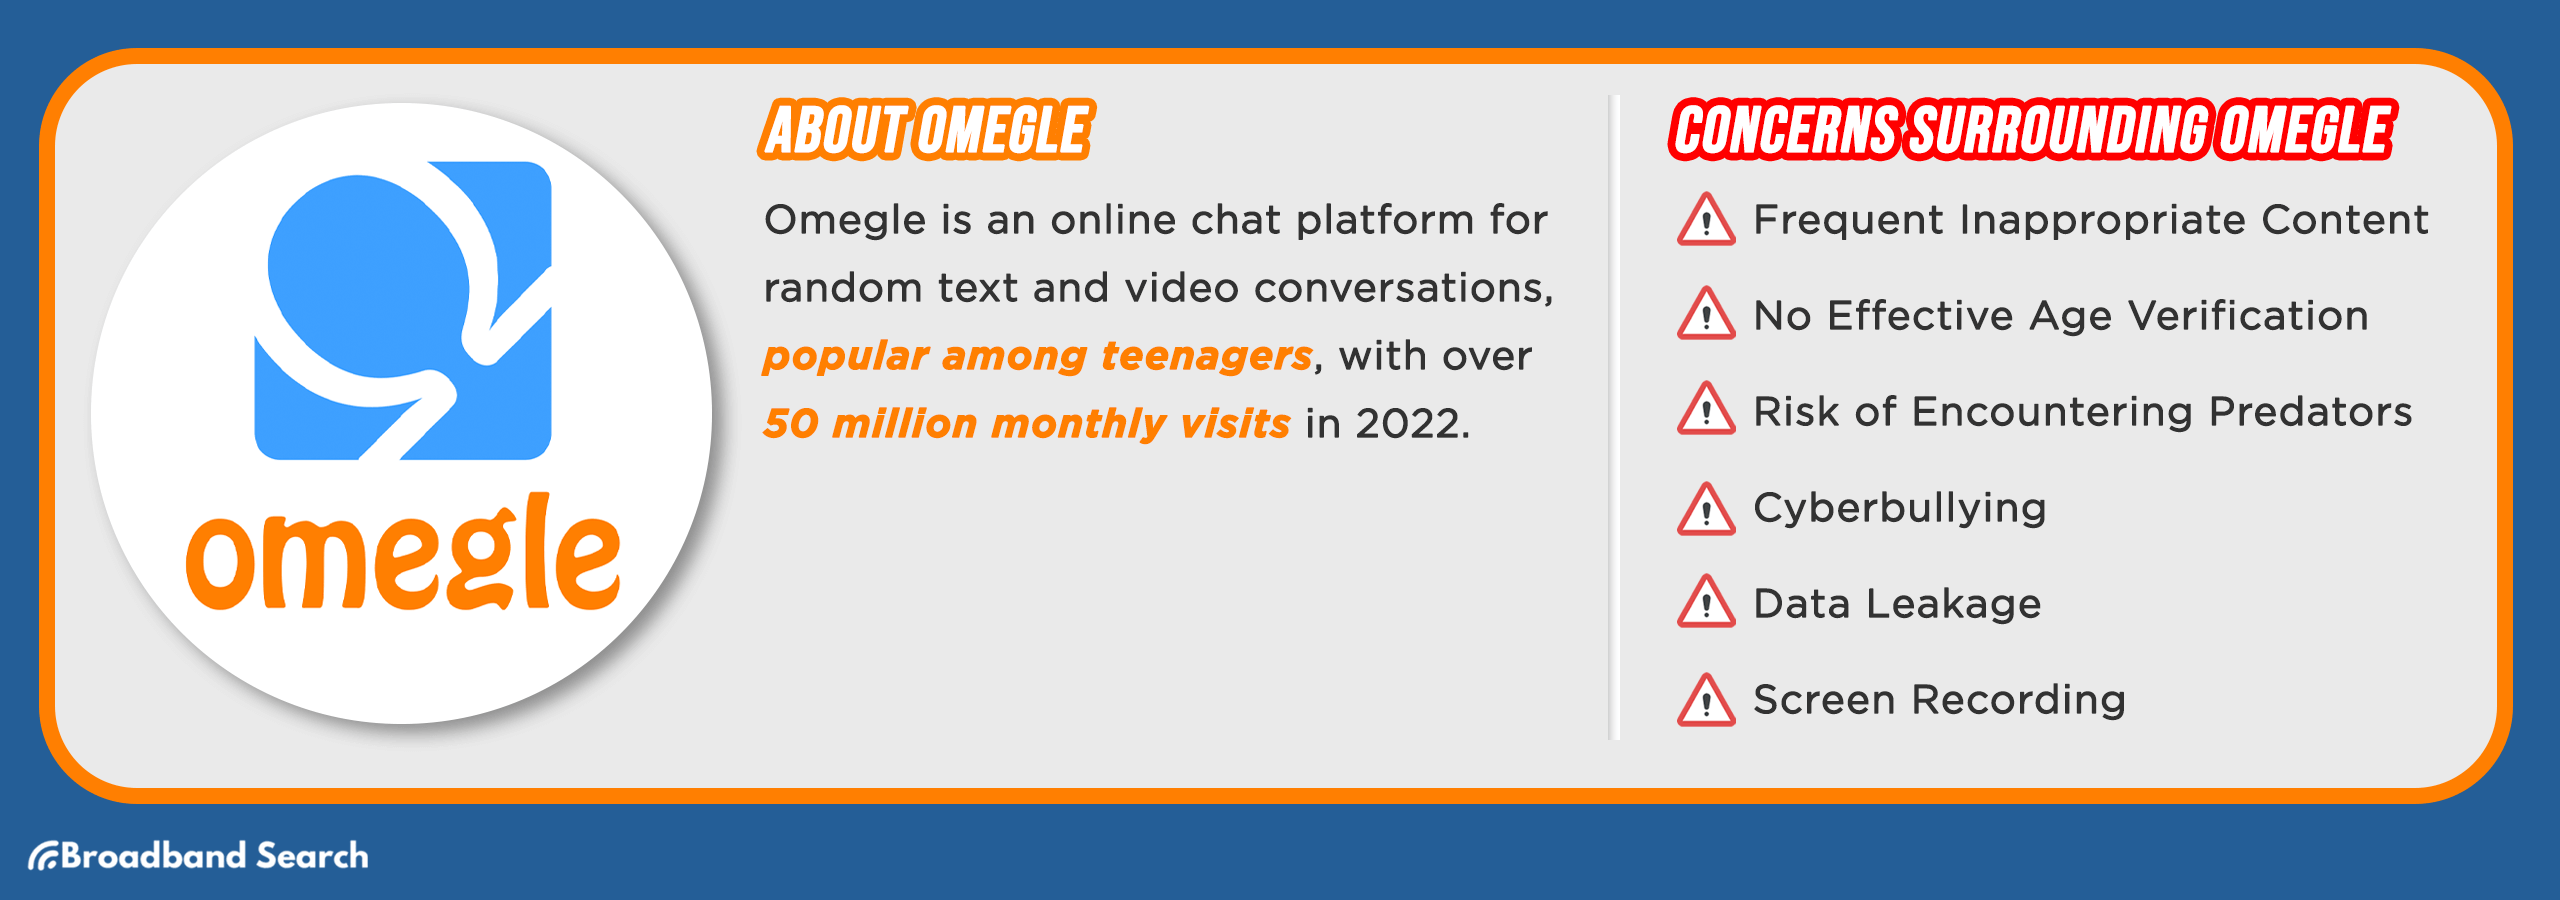 Statistics on Omegle and concerns surrounding usage of the social media site